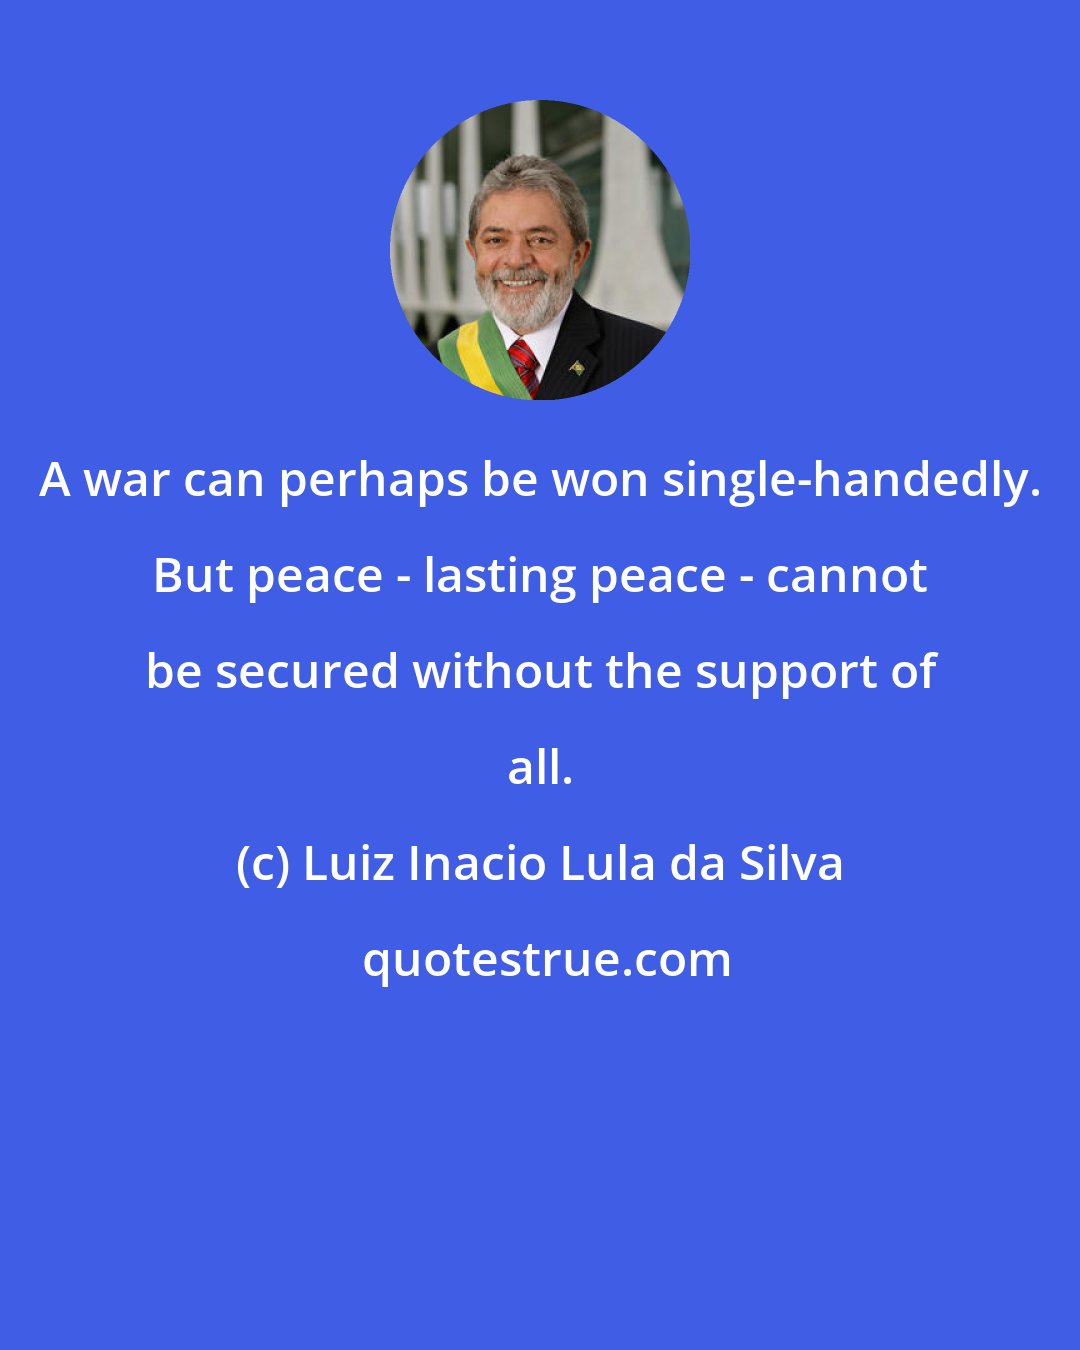 Luiz Inacio Lula da Silva: A war can perhaps be won single-handedly. But peace - lasting peace - cannot be secured without the support of all.